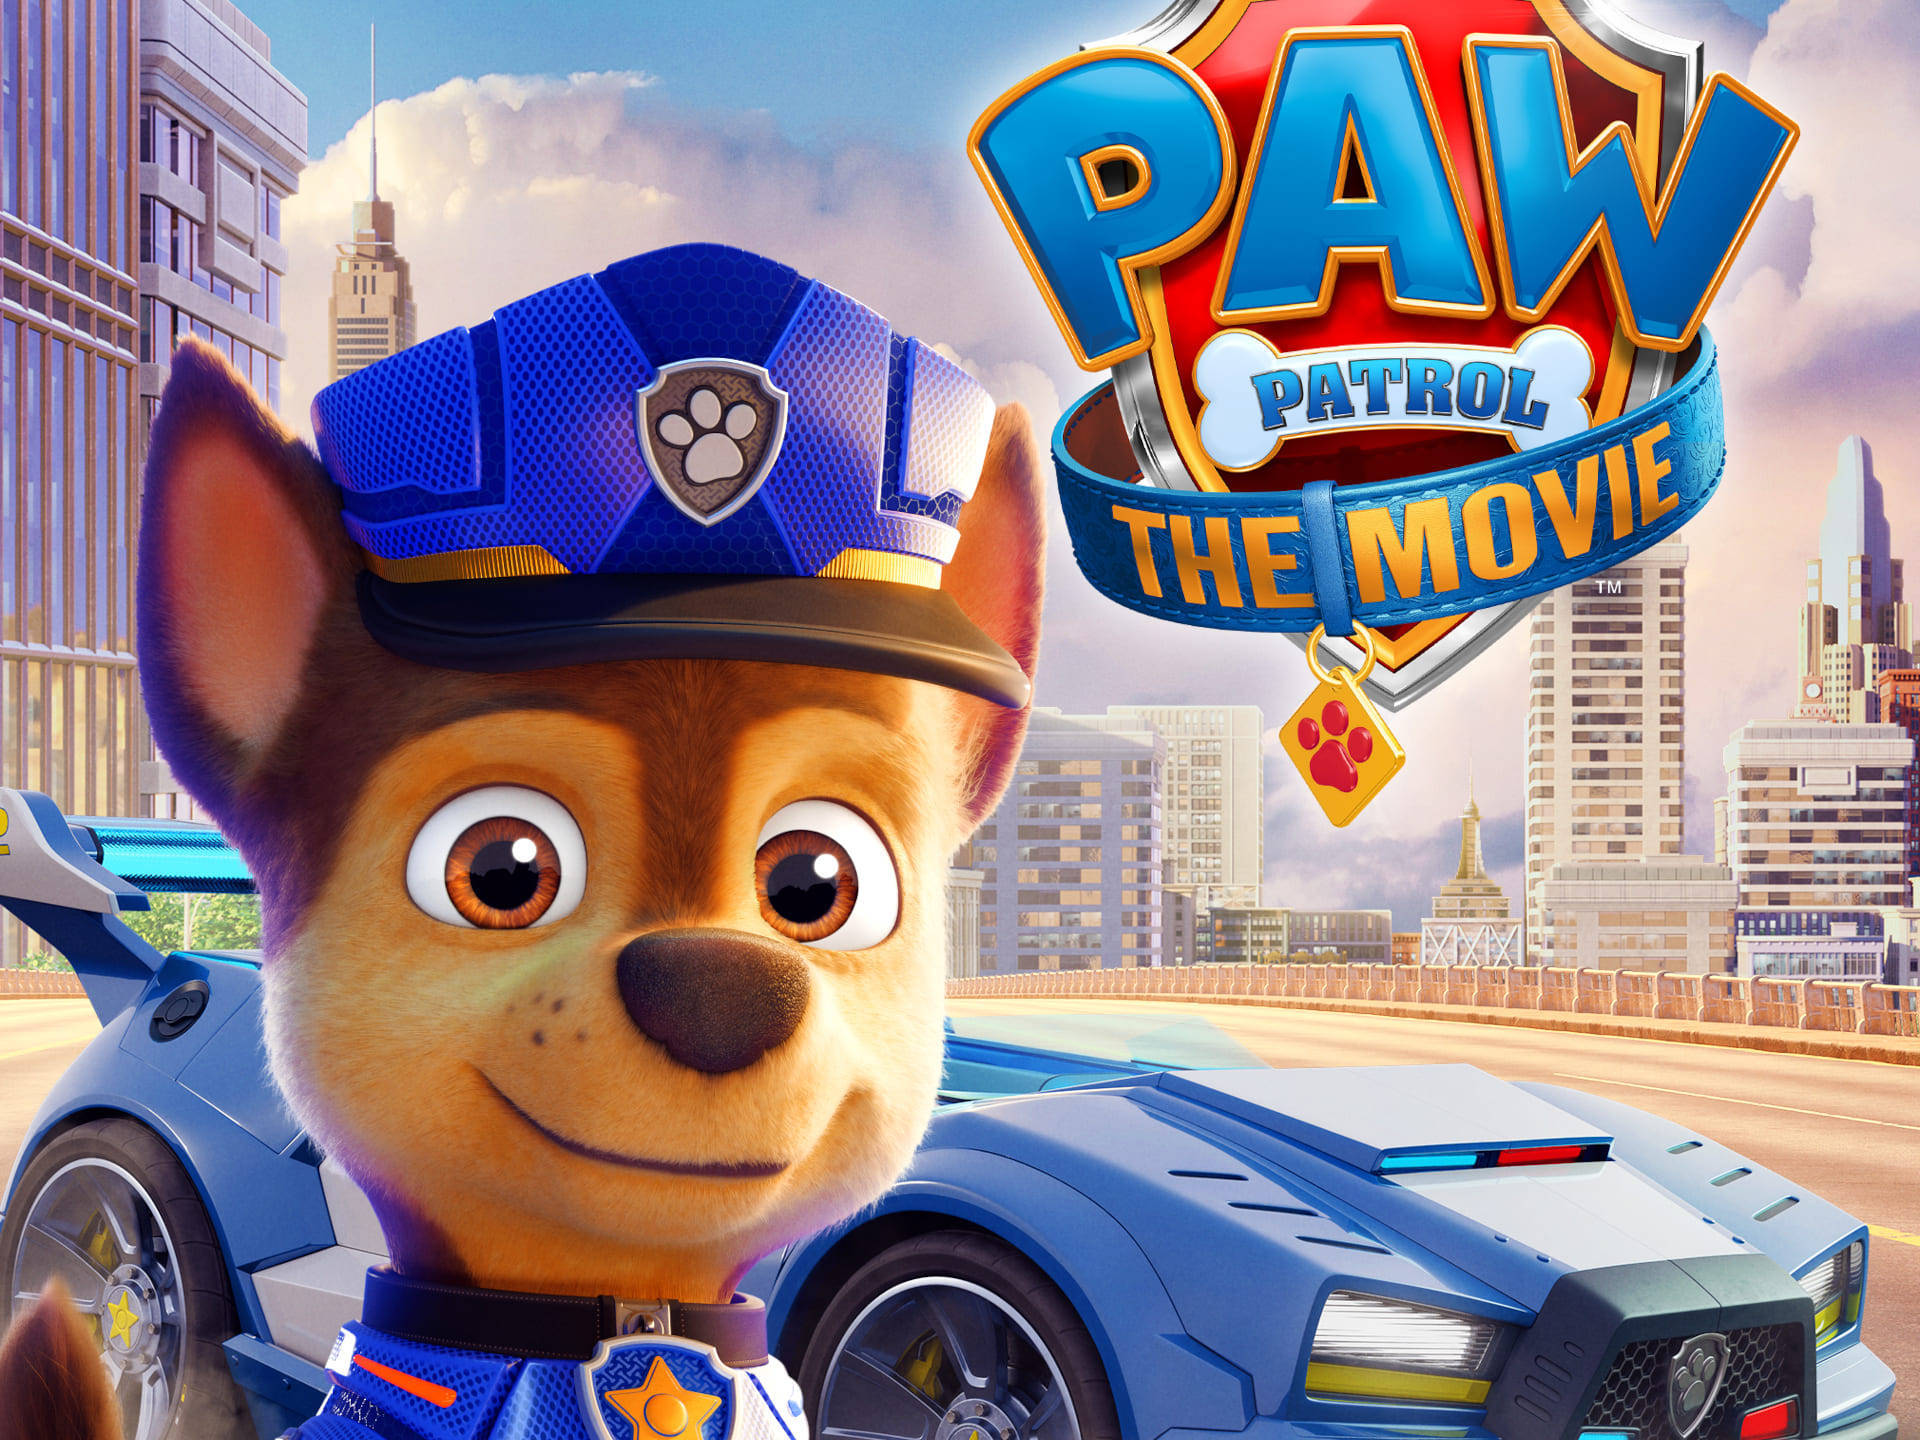 Paw Patrol The Movie Logo And Police Wallpaper